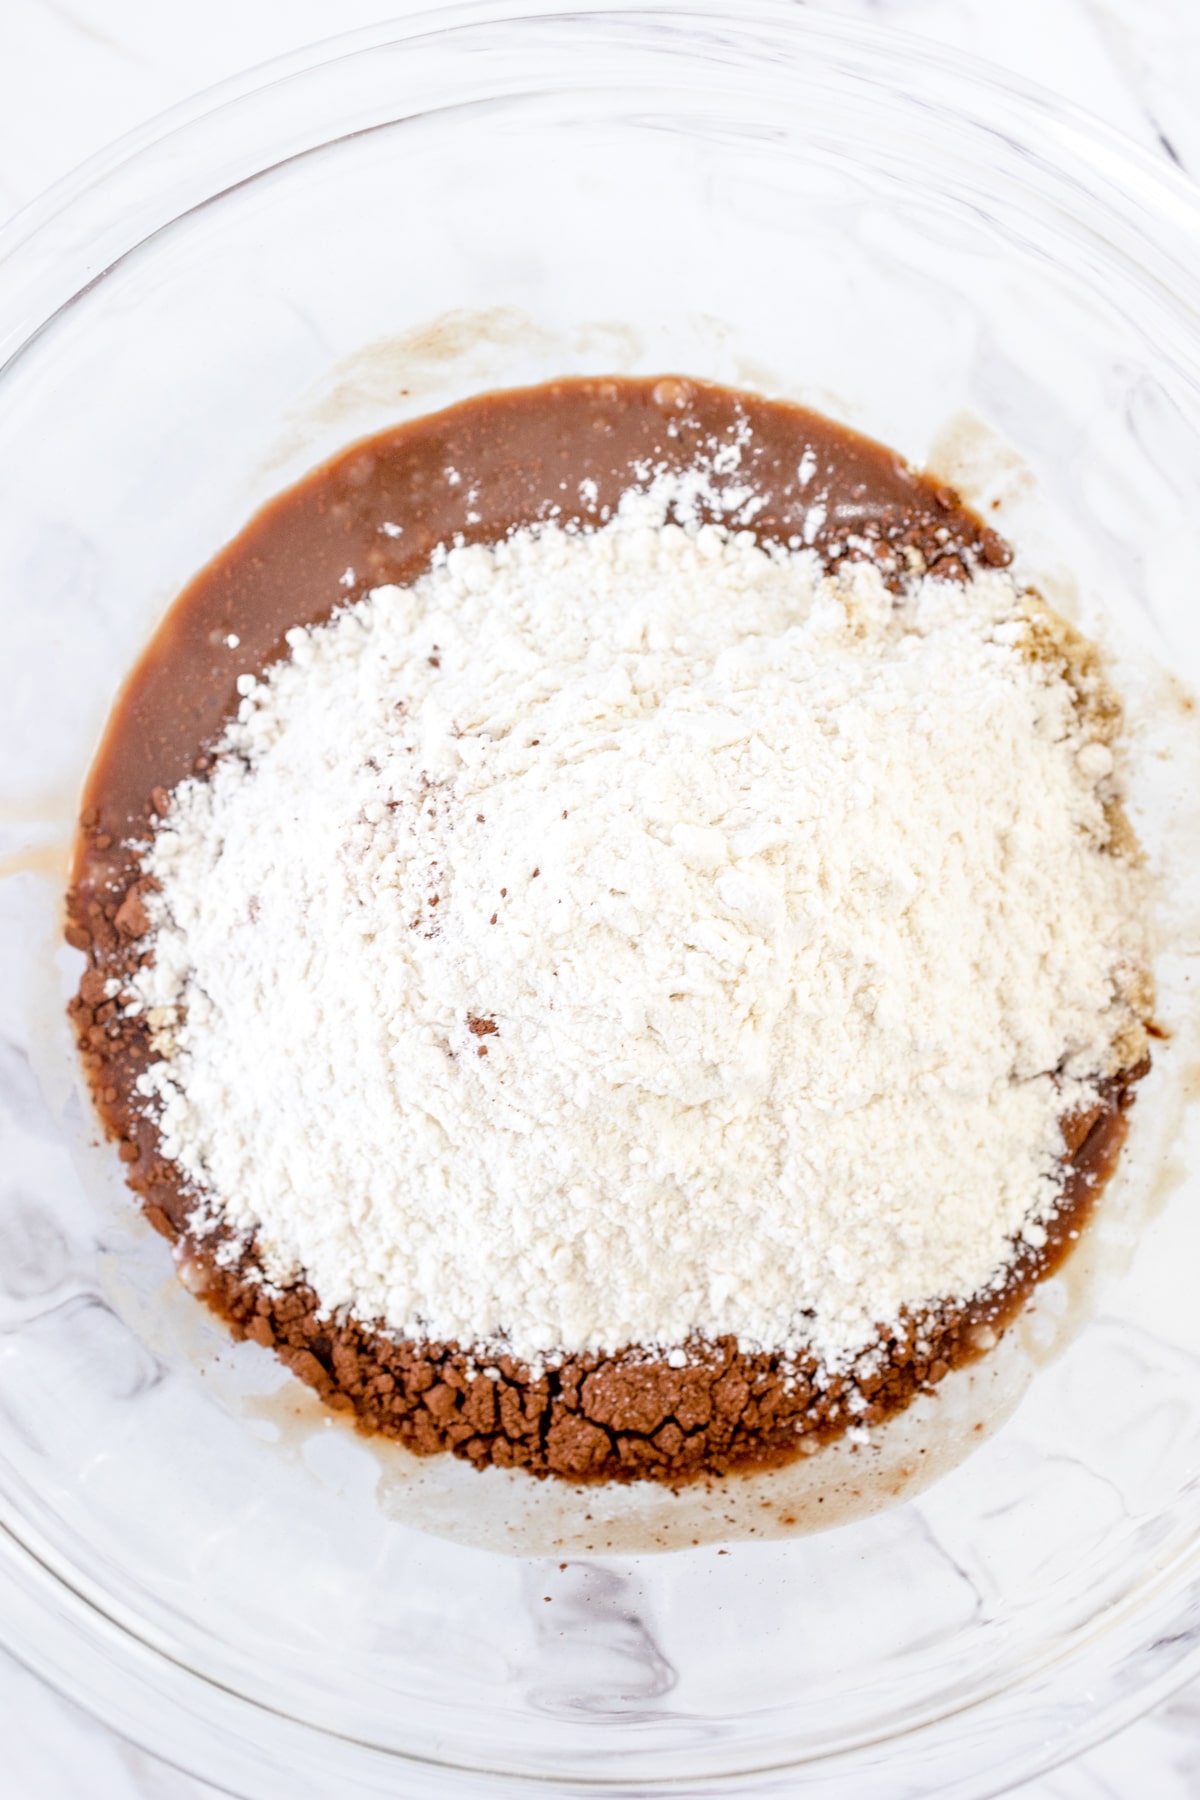 Top view of a glass mixing bowl with chocolate mixture in the bottom and white dry ingredients on top.